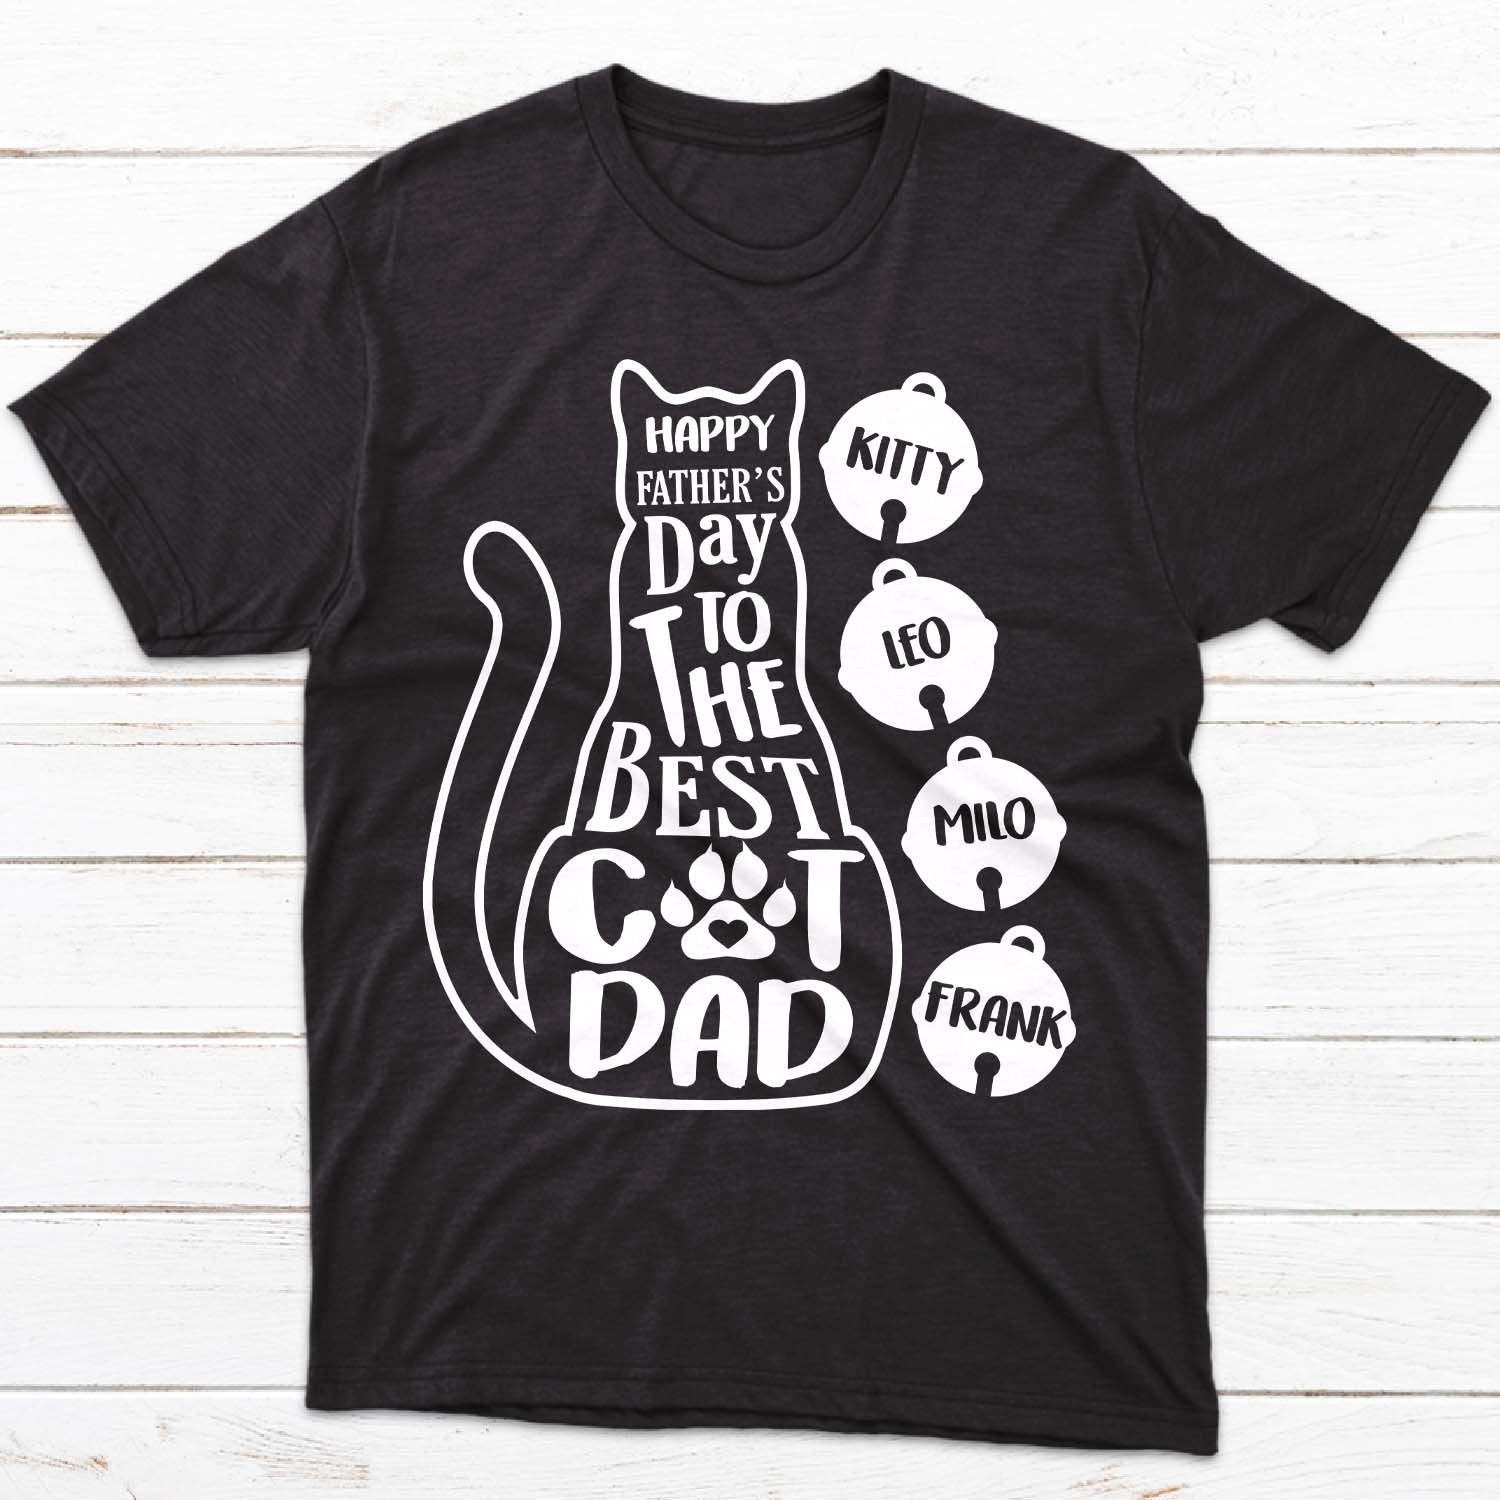 Happy Father's Day To The Best Cat Dad Personalized Shirt